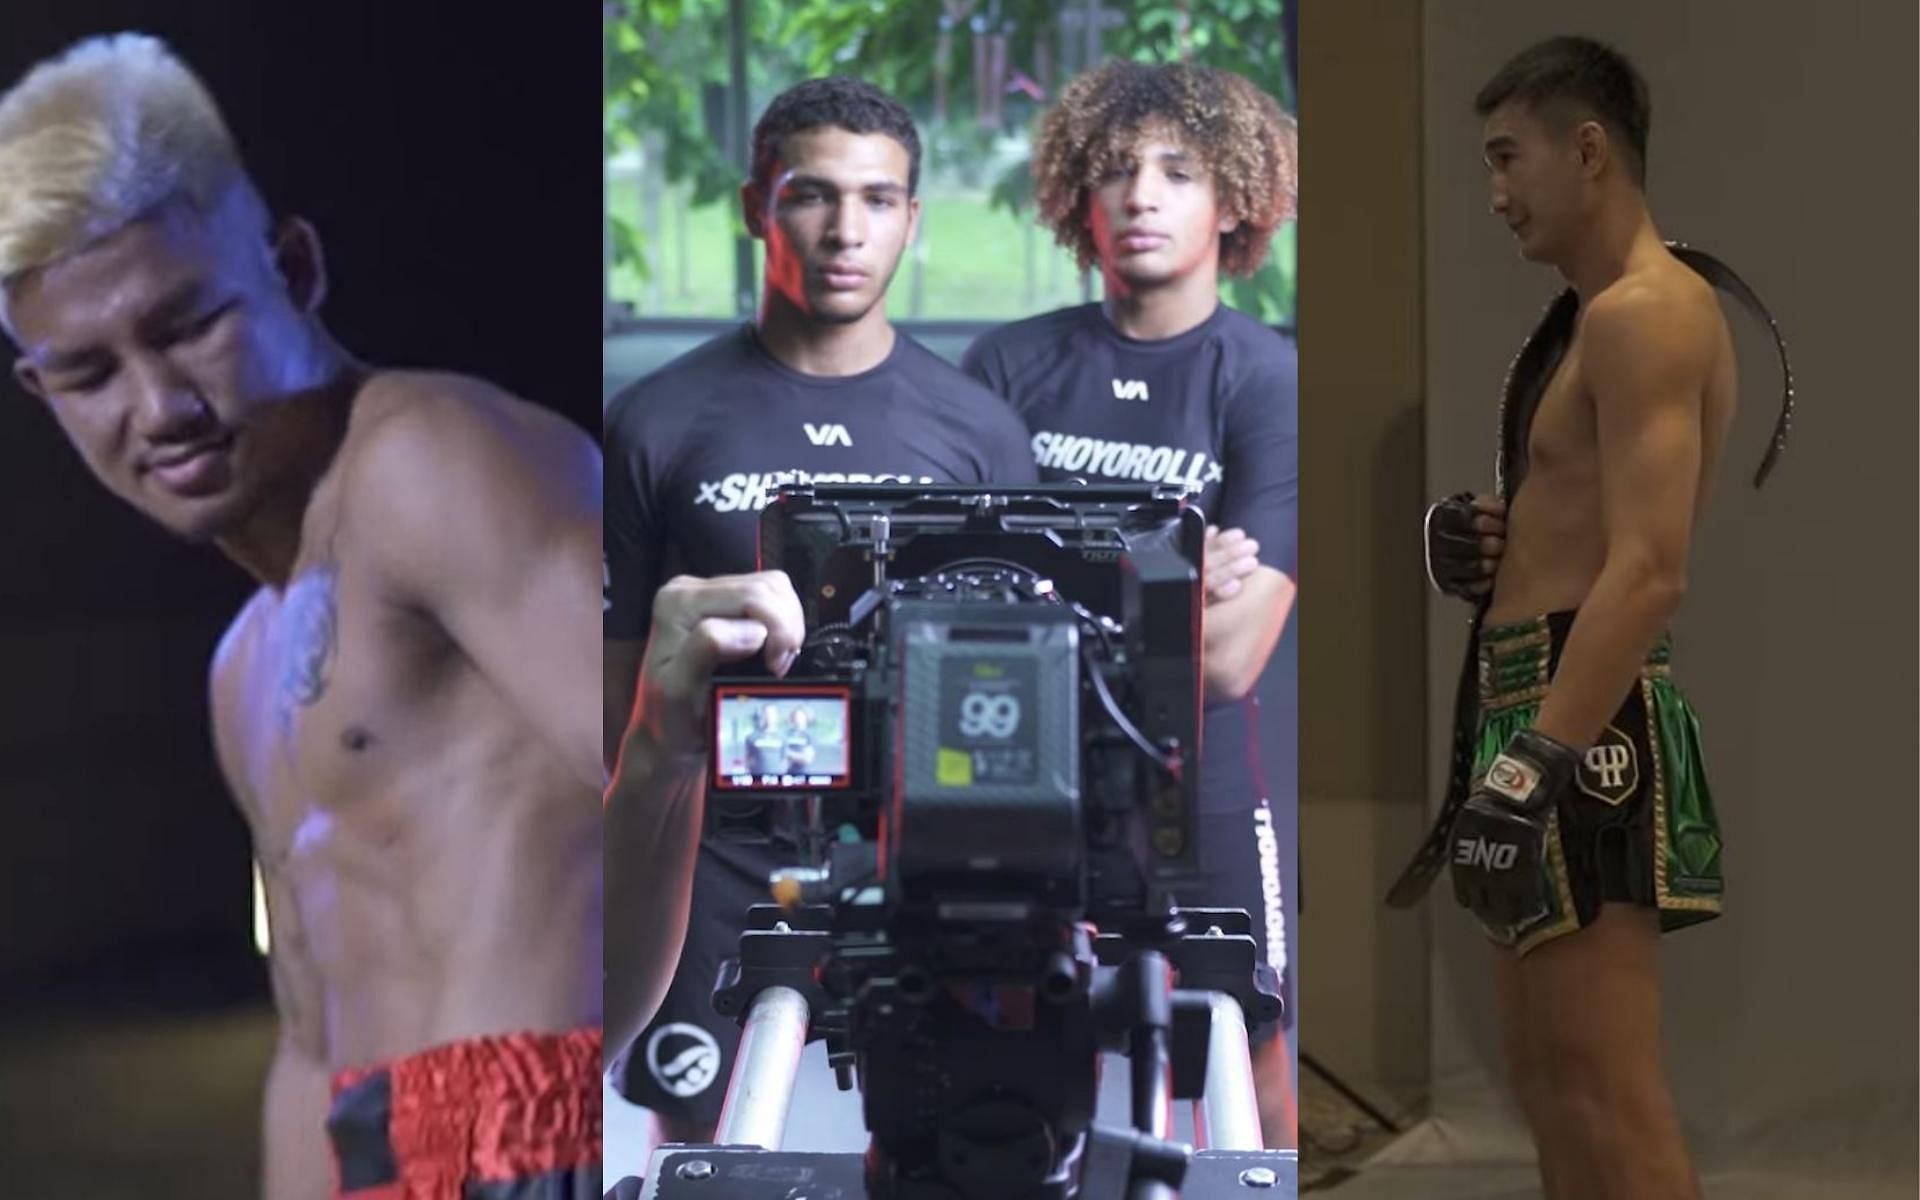 (From left to right) ONE flyweight Muay Thai champ Rodtang Jitmuangnon, the Ruotolo Brothers, ONE featherweight Muay Thai champ Petchmorakot Petchyindee and more appear in ONE 157 vlog. (Images courtesy of ONE Championship&#039;s YouTube channel)